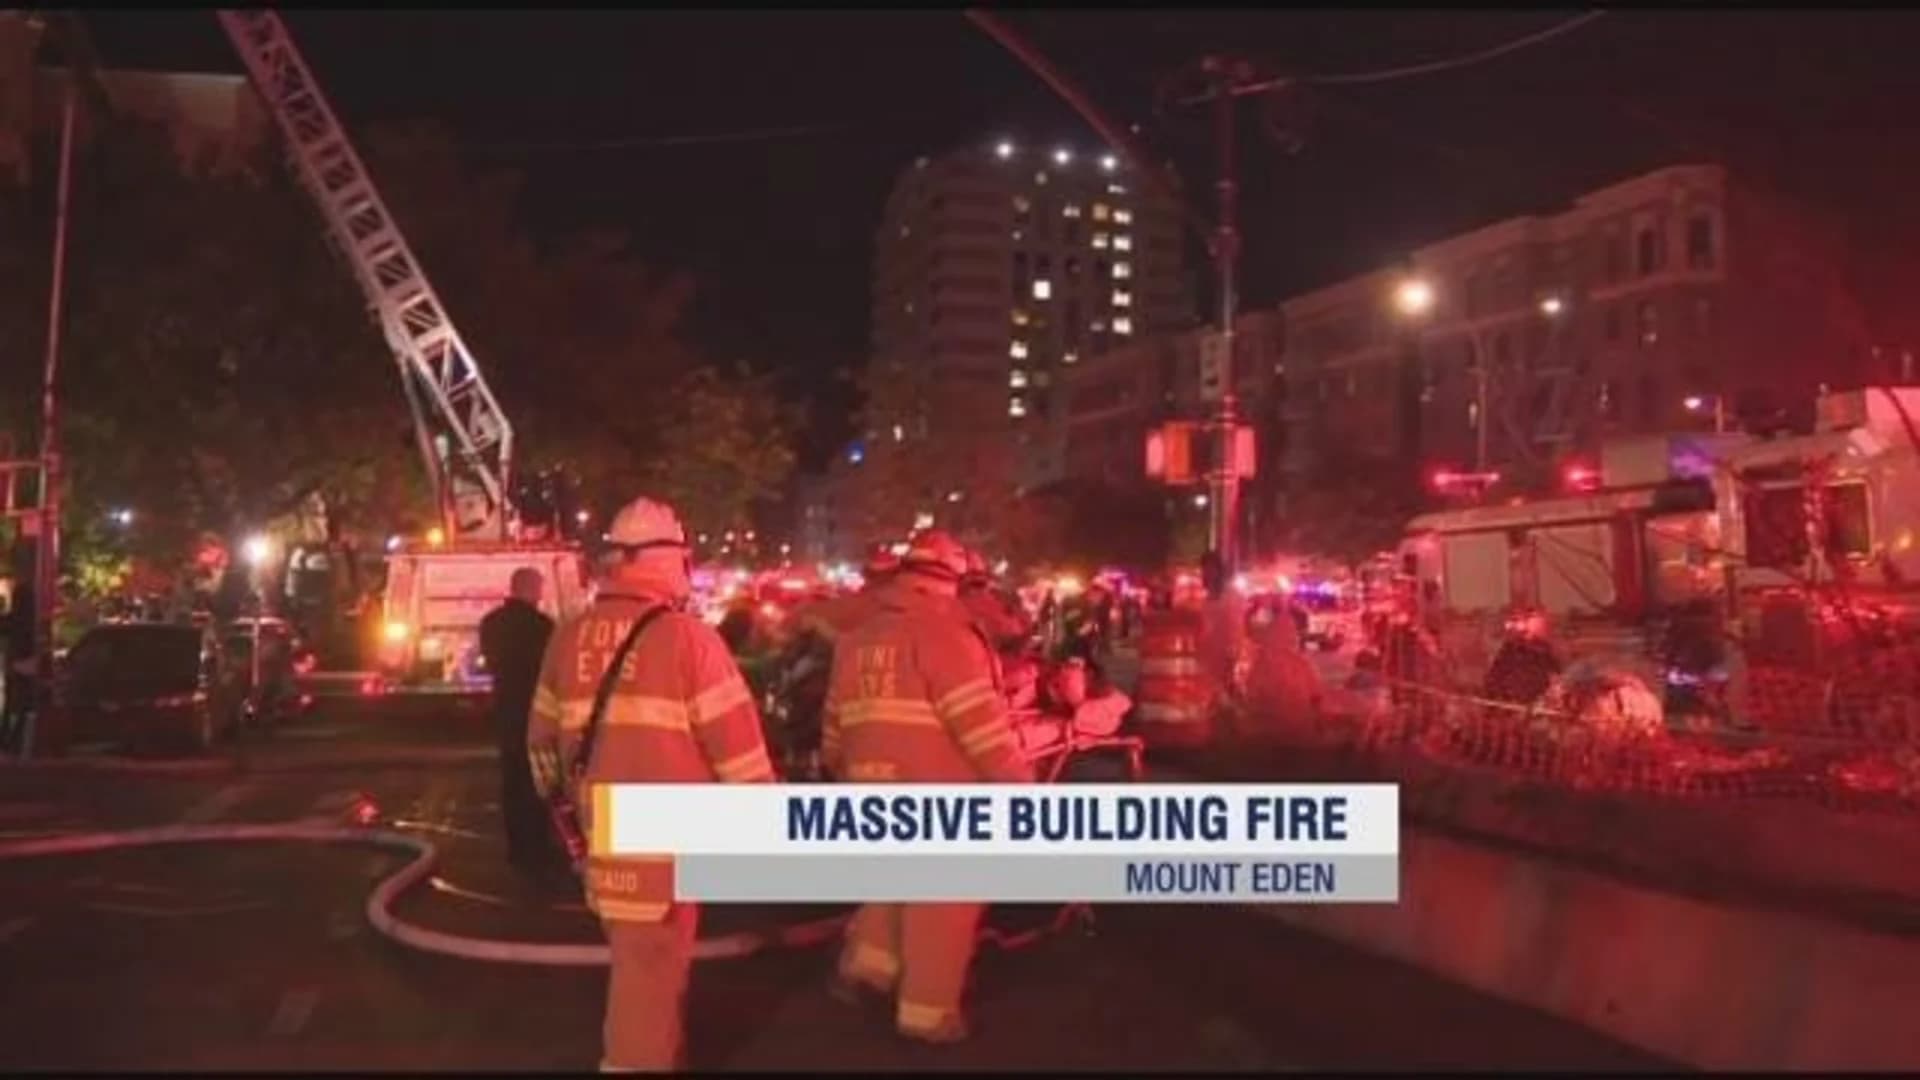 Fire officials: 5-alarm fire breaks out at Mount Eden building; 10 injured